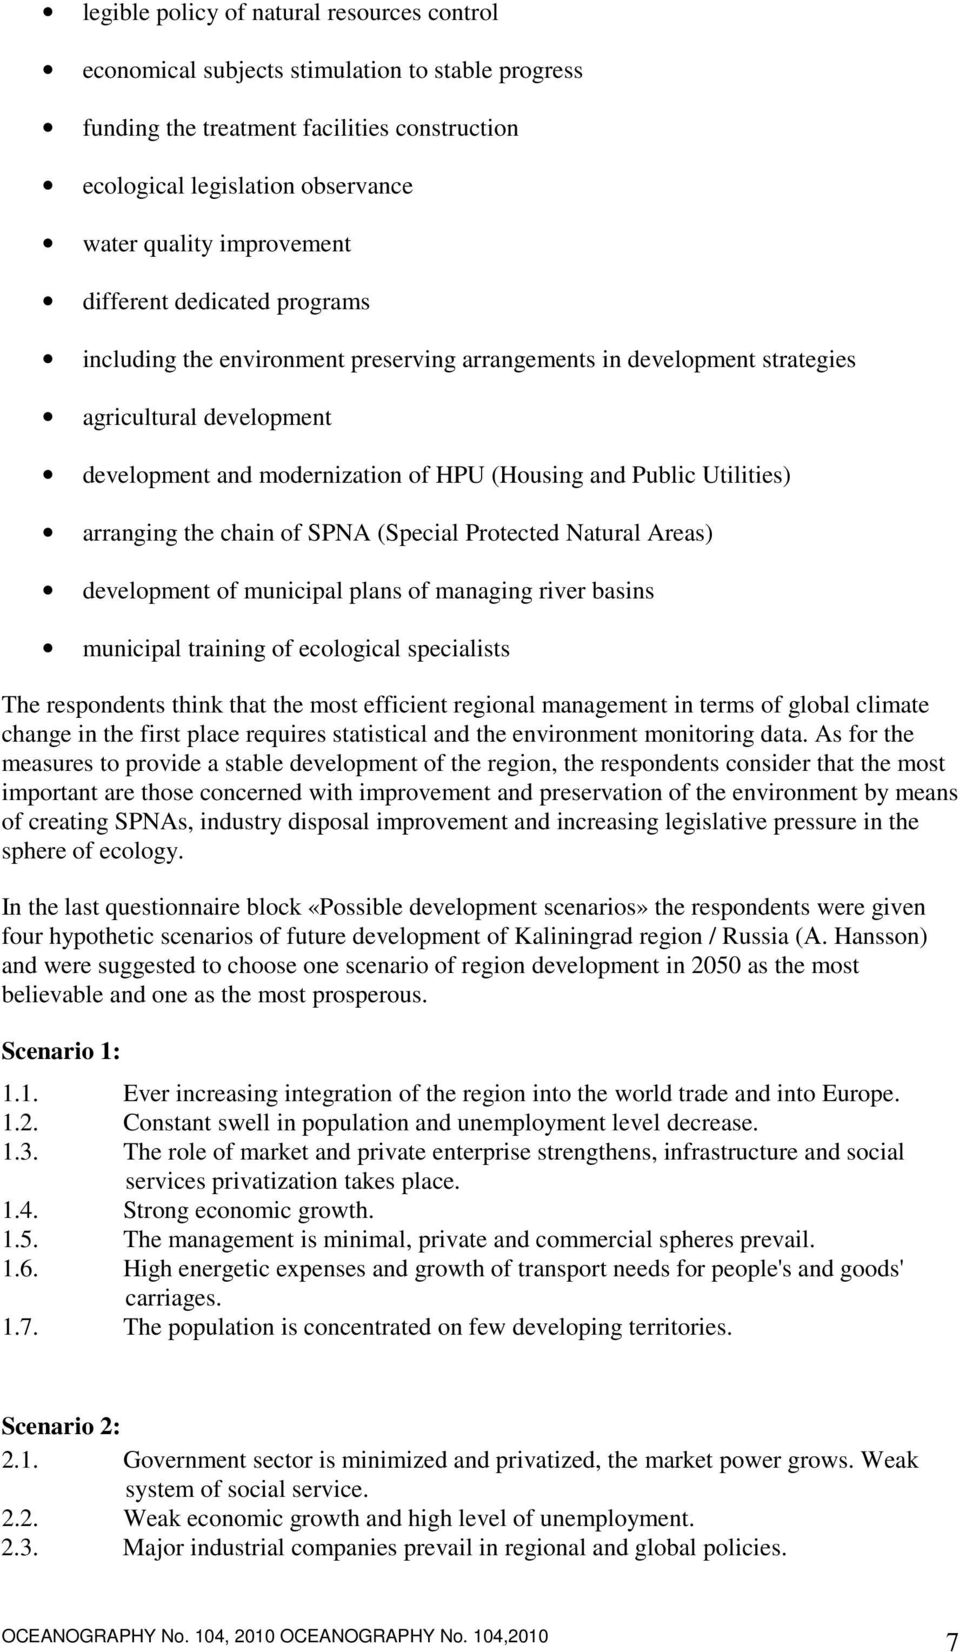 Utilities) arranging the chain of SPNA (Special Protected Natural Areas) development of municipal plans of managing river basins municipal training of ecological specialists The respondents think